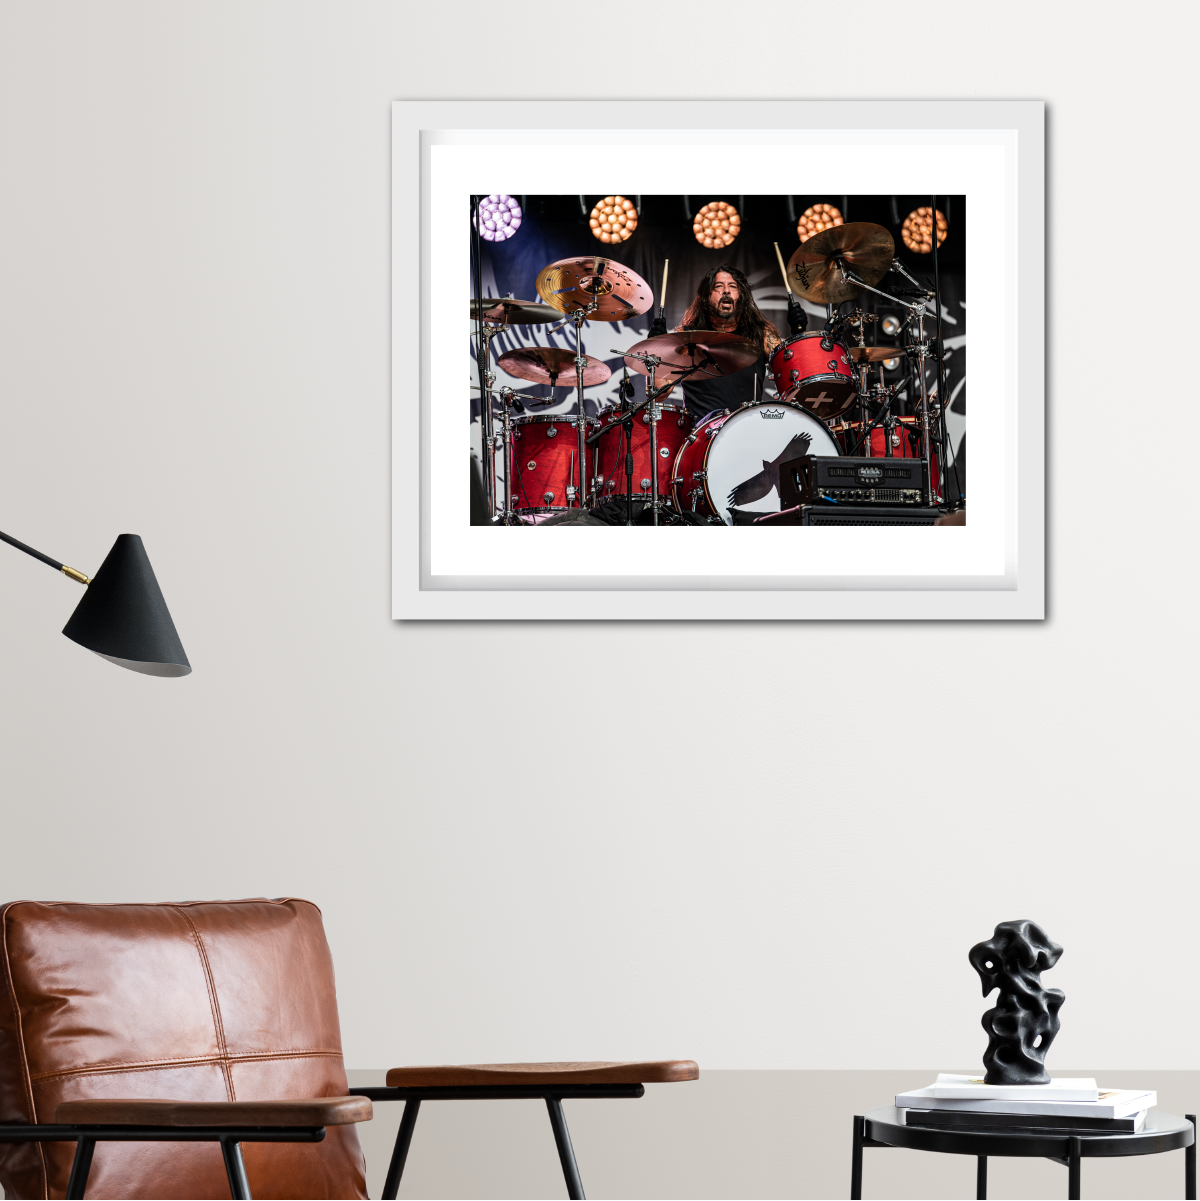 dave grohl - taylor's wings - wembley stadium, london, september 3, 2022 - 18 x 24 inch - limited edition print